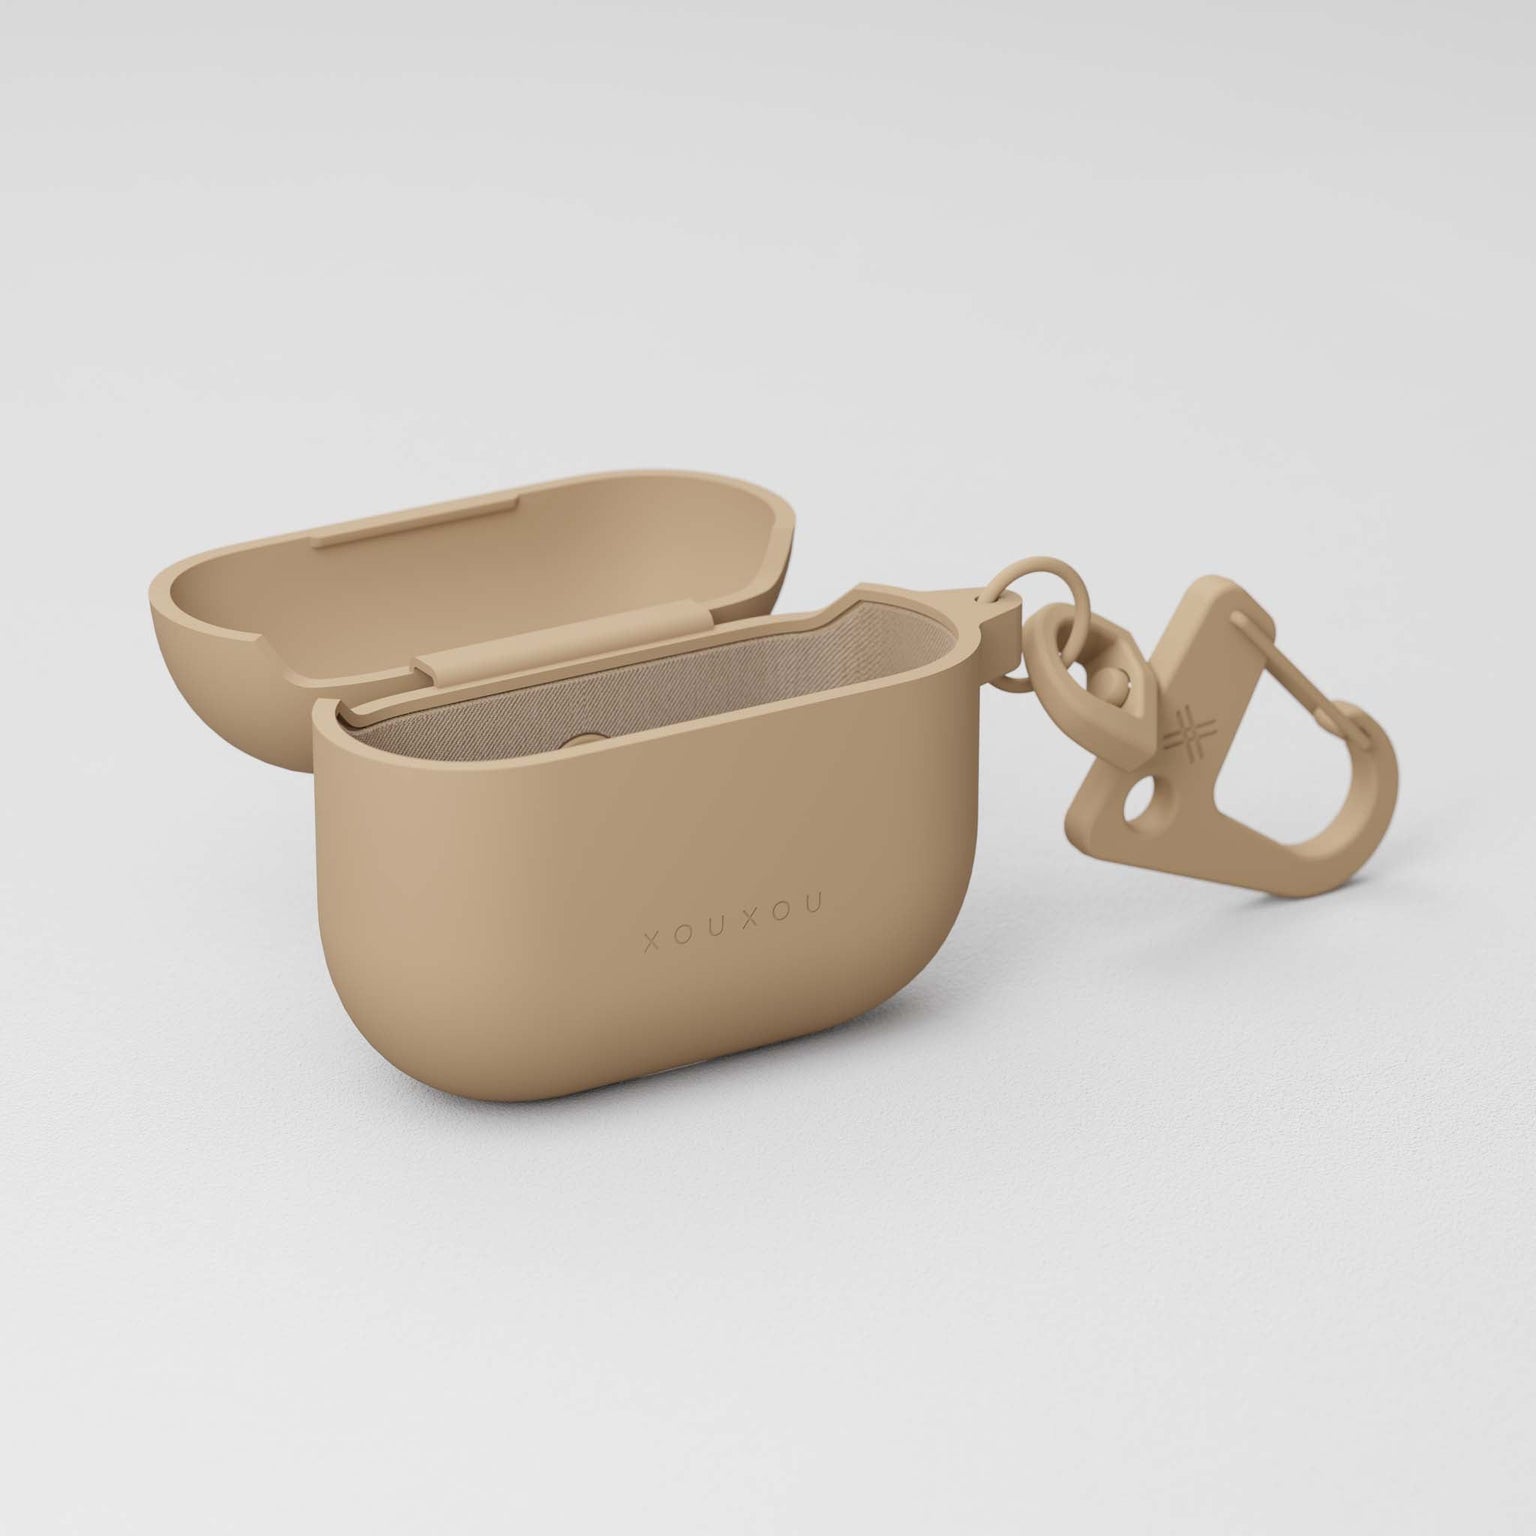 AirPods case 3rd gen. in Sand Brown soft-touch finish | XOUXOU